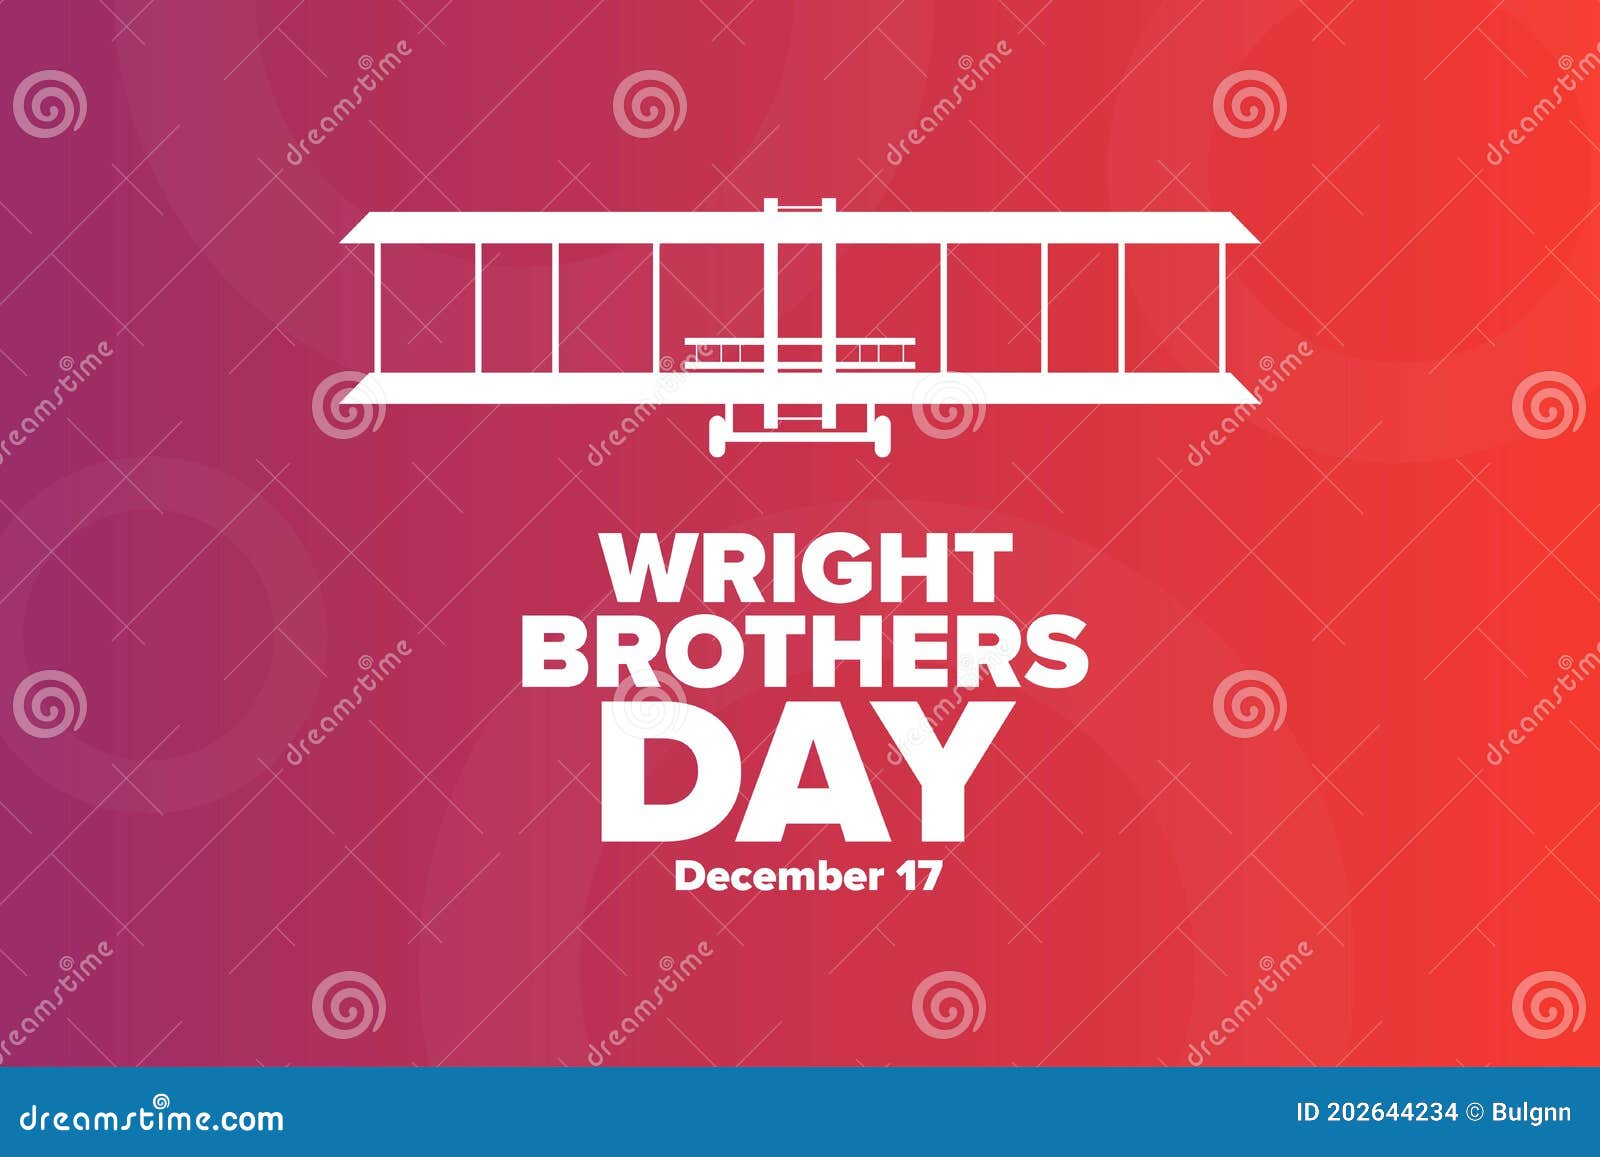 wright brothers day. december 17. holiday concept. template for background, banner, card, poster with text inscription